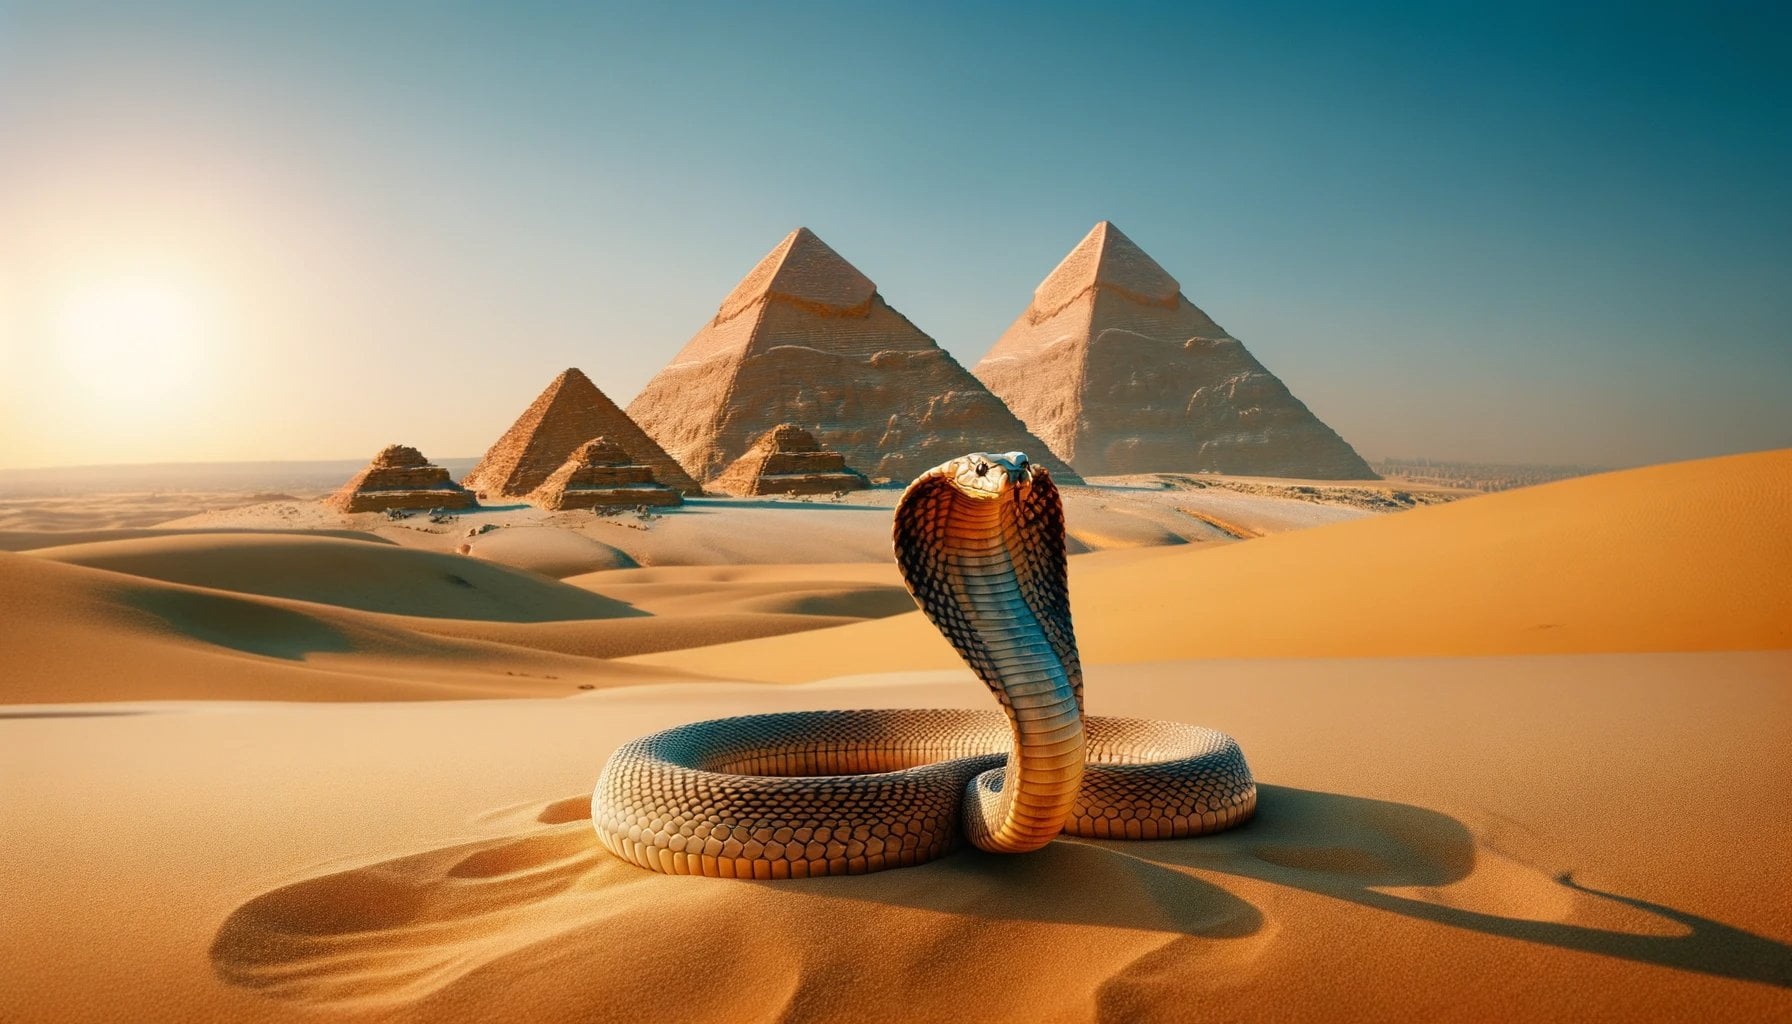 snakes of ancient egypt 1